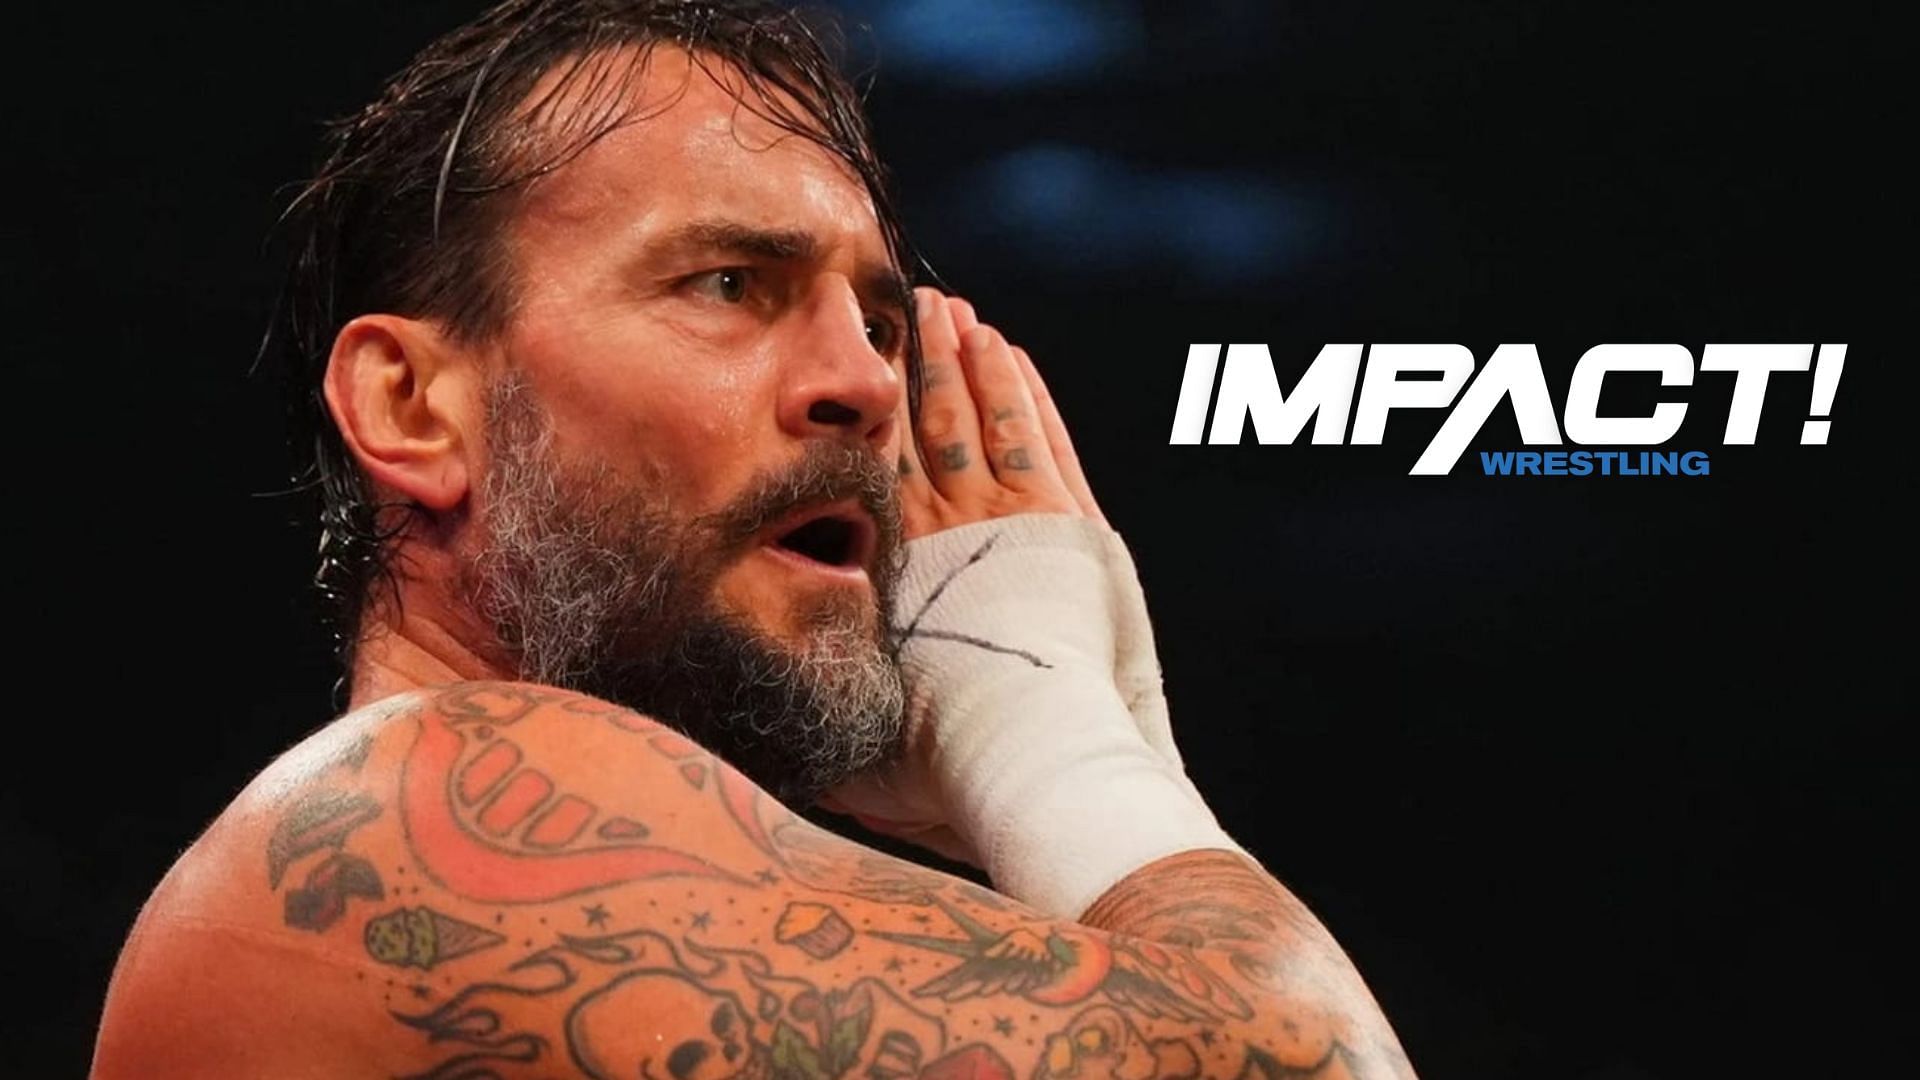 What did CM Punk say to this Impact Wrestling star?